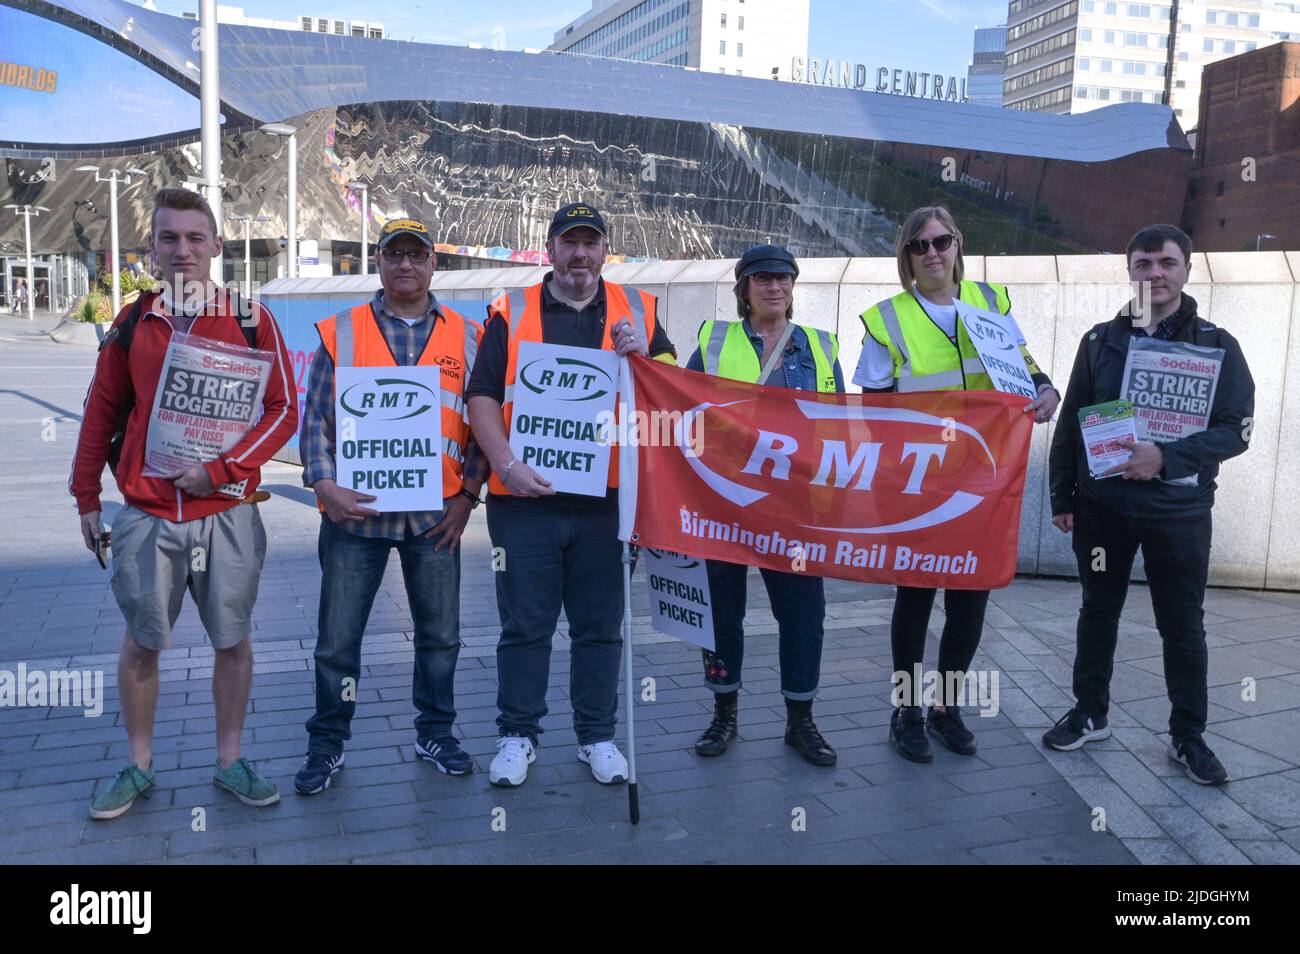 New Street, Birmingham, England, June 21st 2022. Rail workers on the picket line at New Street Station in Birmingham are striking for a 7 percent wage increase across the British networks after RMT Unions failed to reach an agreement. Pic by Credit: Sam Holiday/Alamy Live News Stock Photo